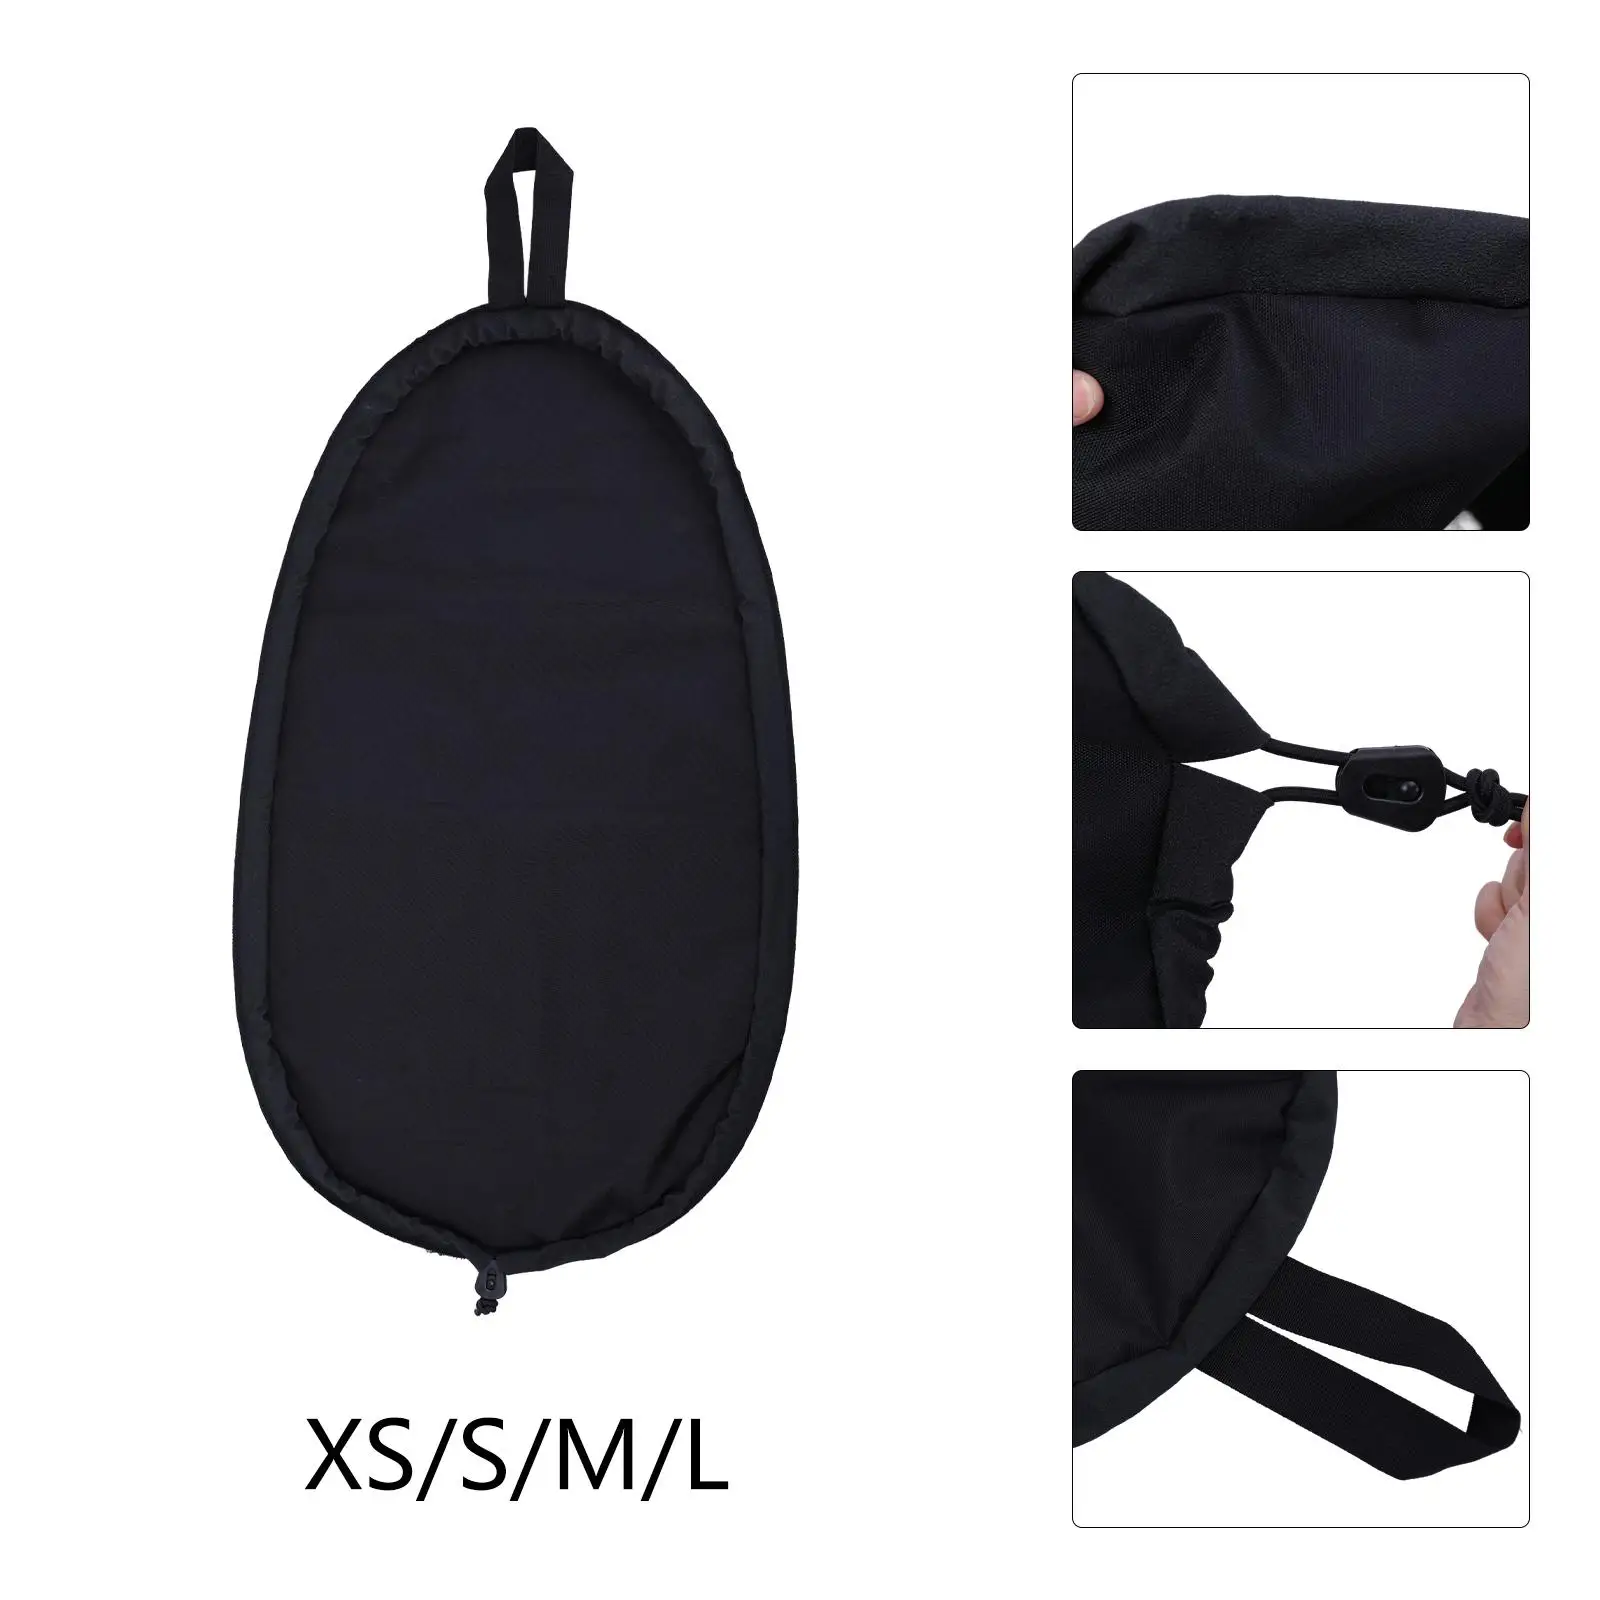 Kayak Cockpit Cover Cockpit Protector Waterproof Adjustable Sun Protection Dustproof 600D Oxford Cloth Seat Cover for Transport